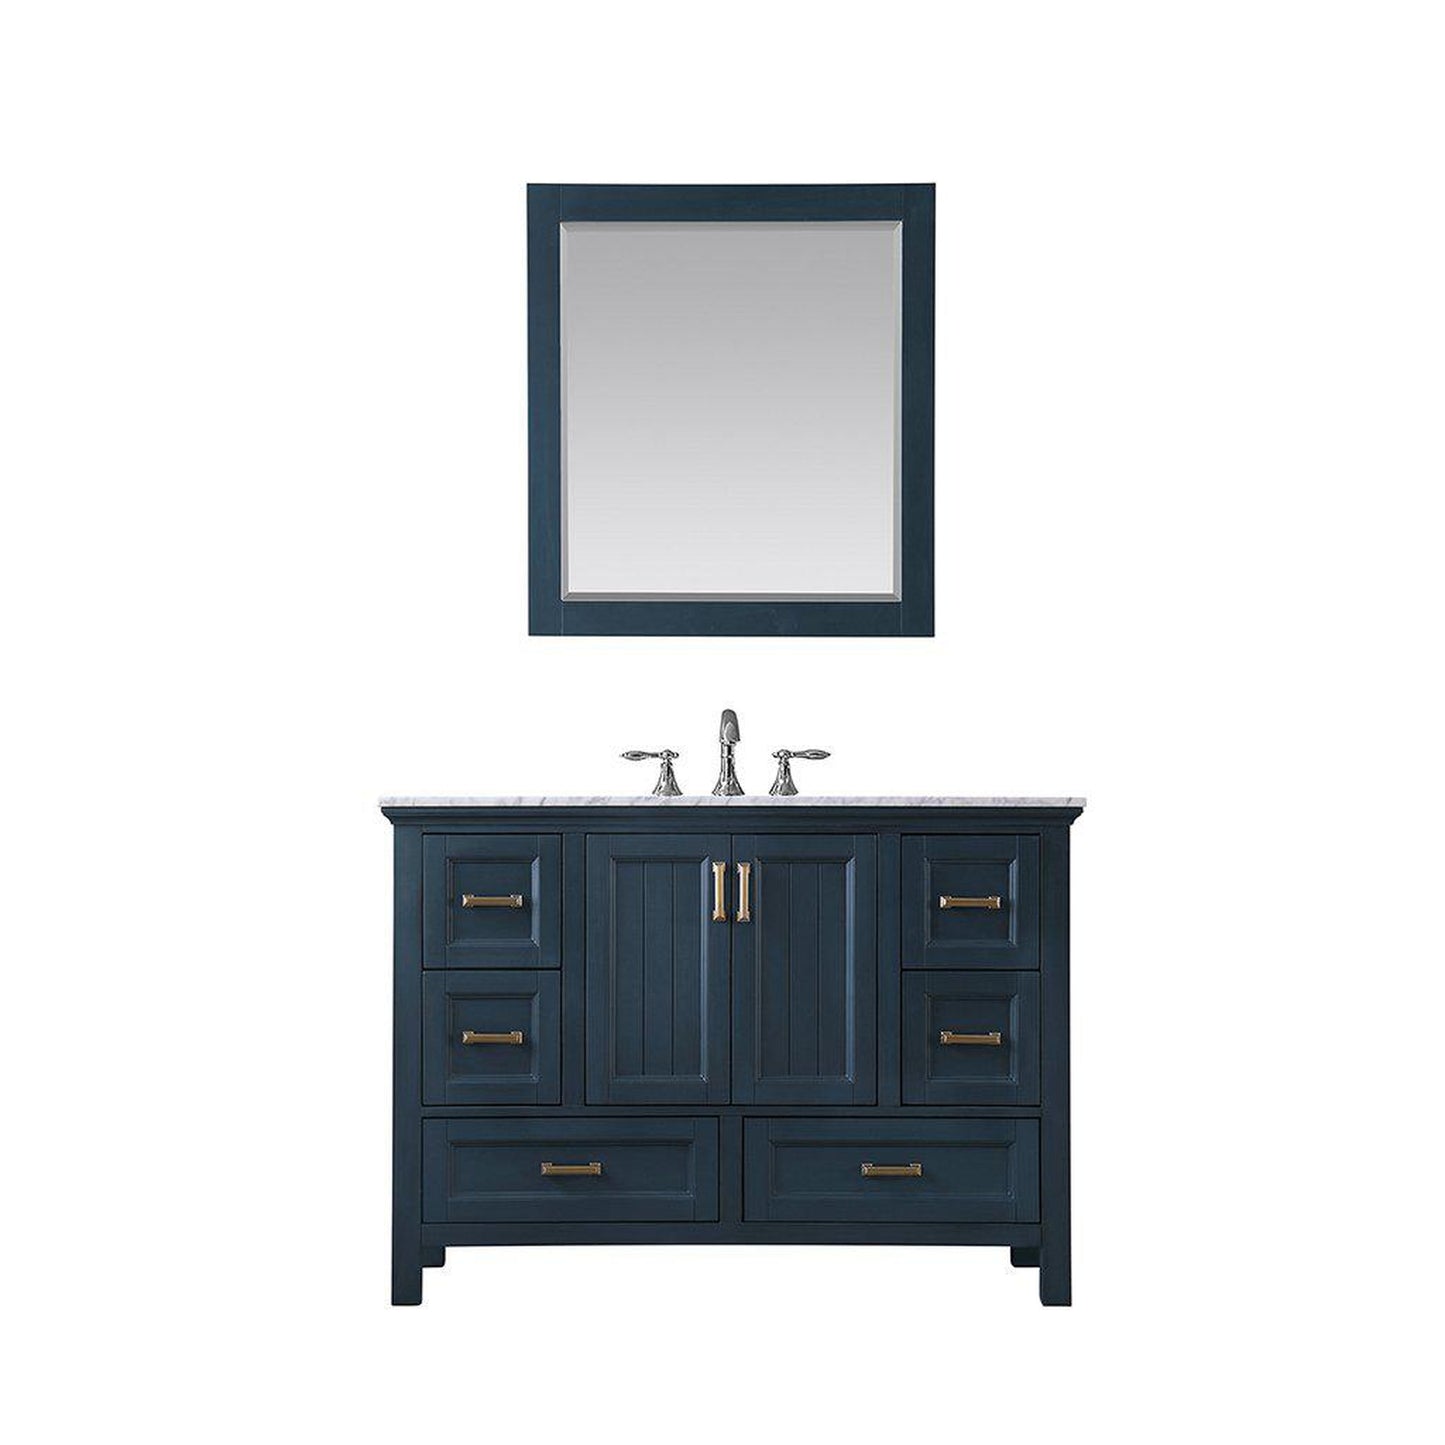 Altair Isla 48" Single Classic Blue Freestanding Bathroom Vanity Set With Mirror, Natural Carrara White Marble Top, Rectangular Undermount Ceramic Sink, and Overflow